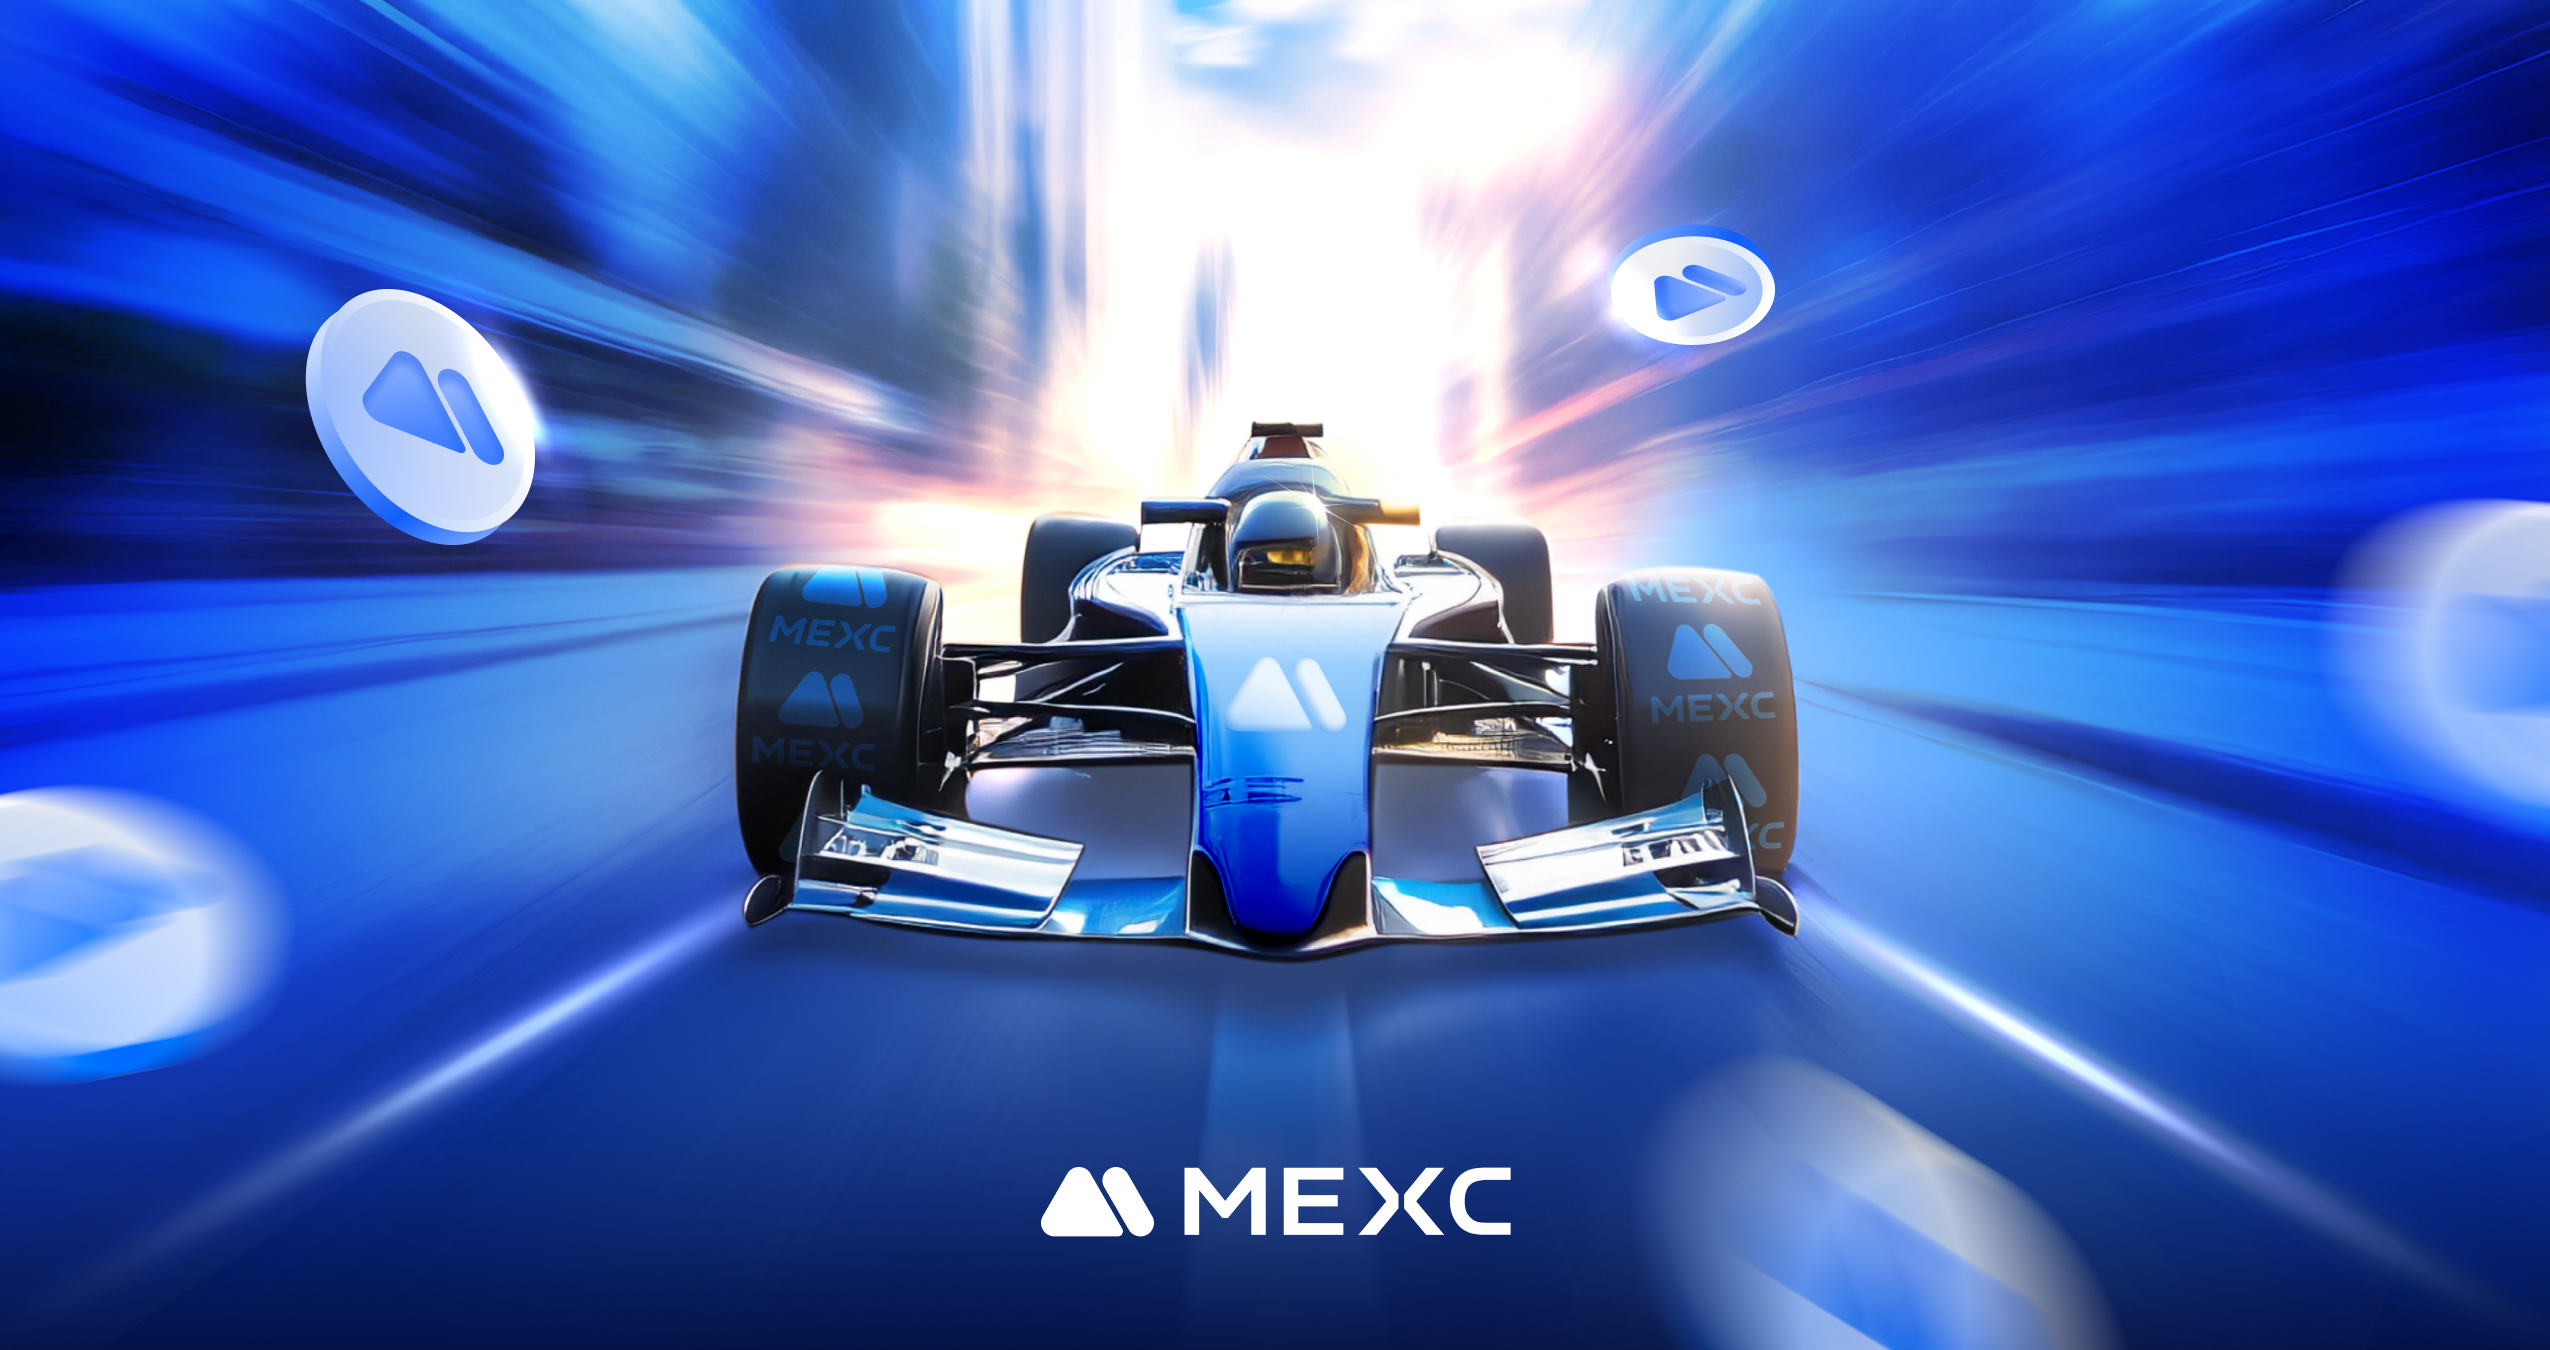 2022 to 2024 – A Constant Acceleration For MX Tokens